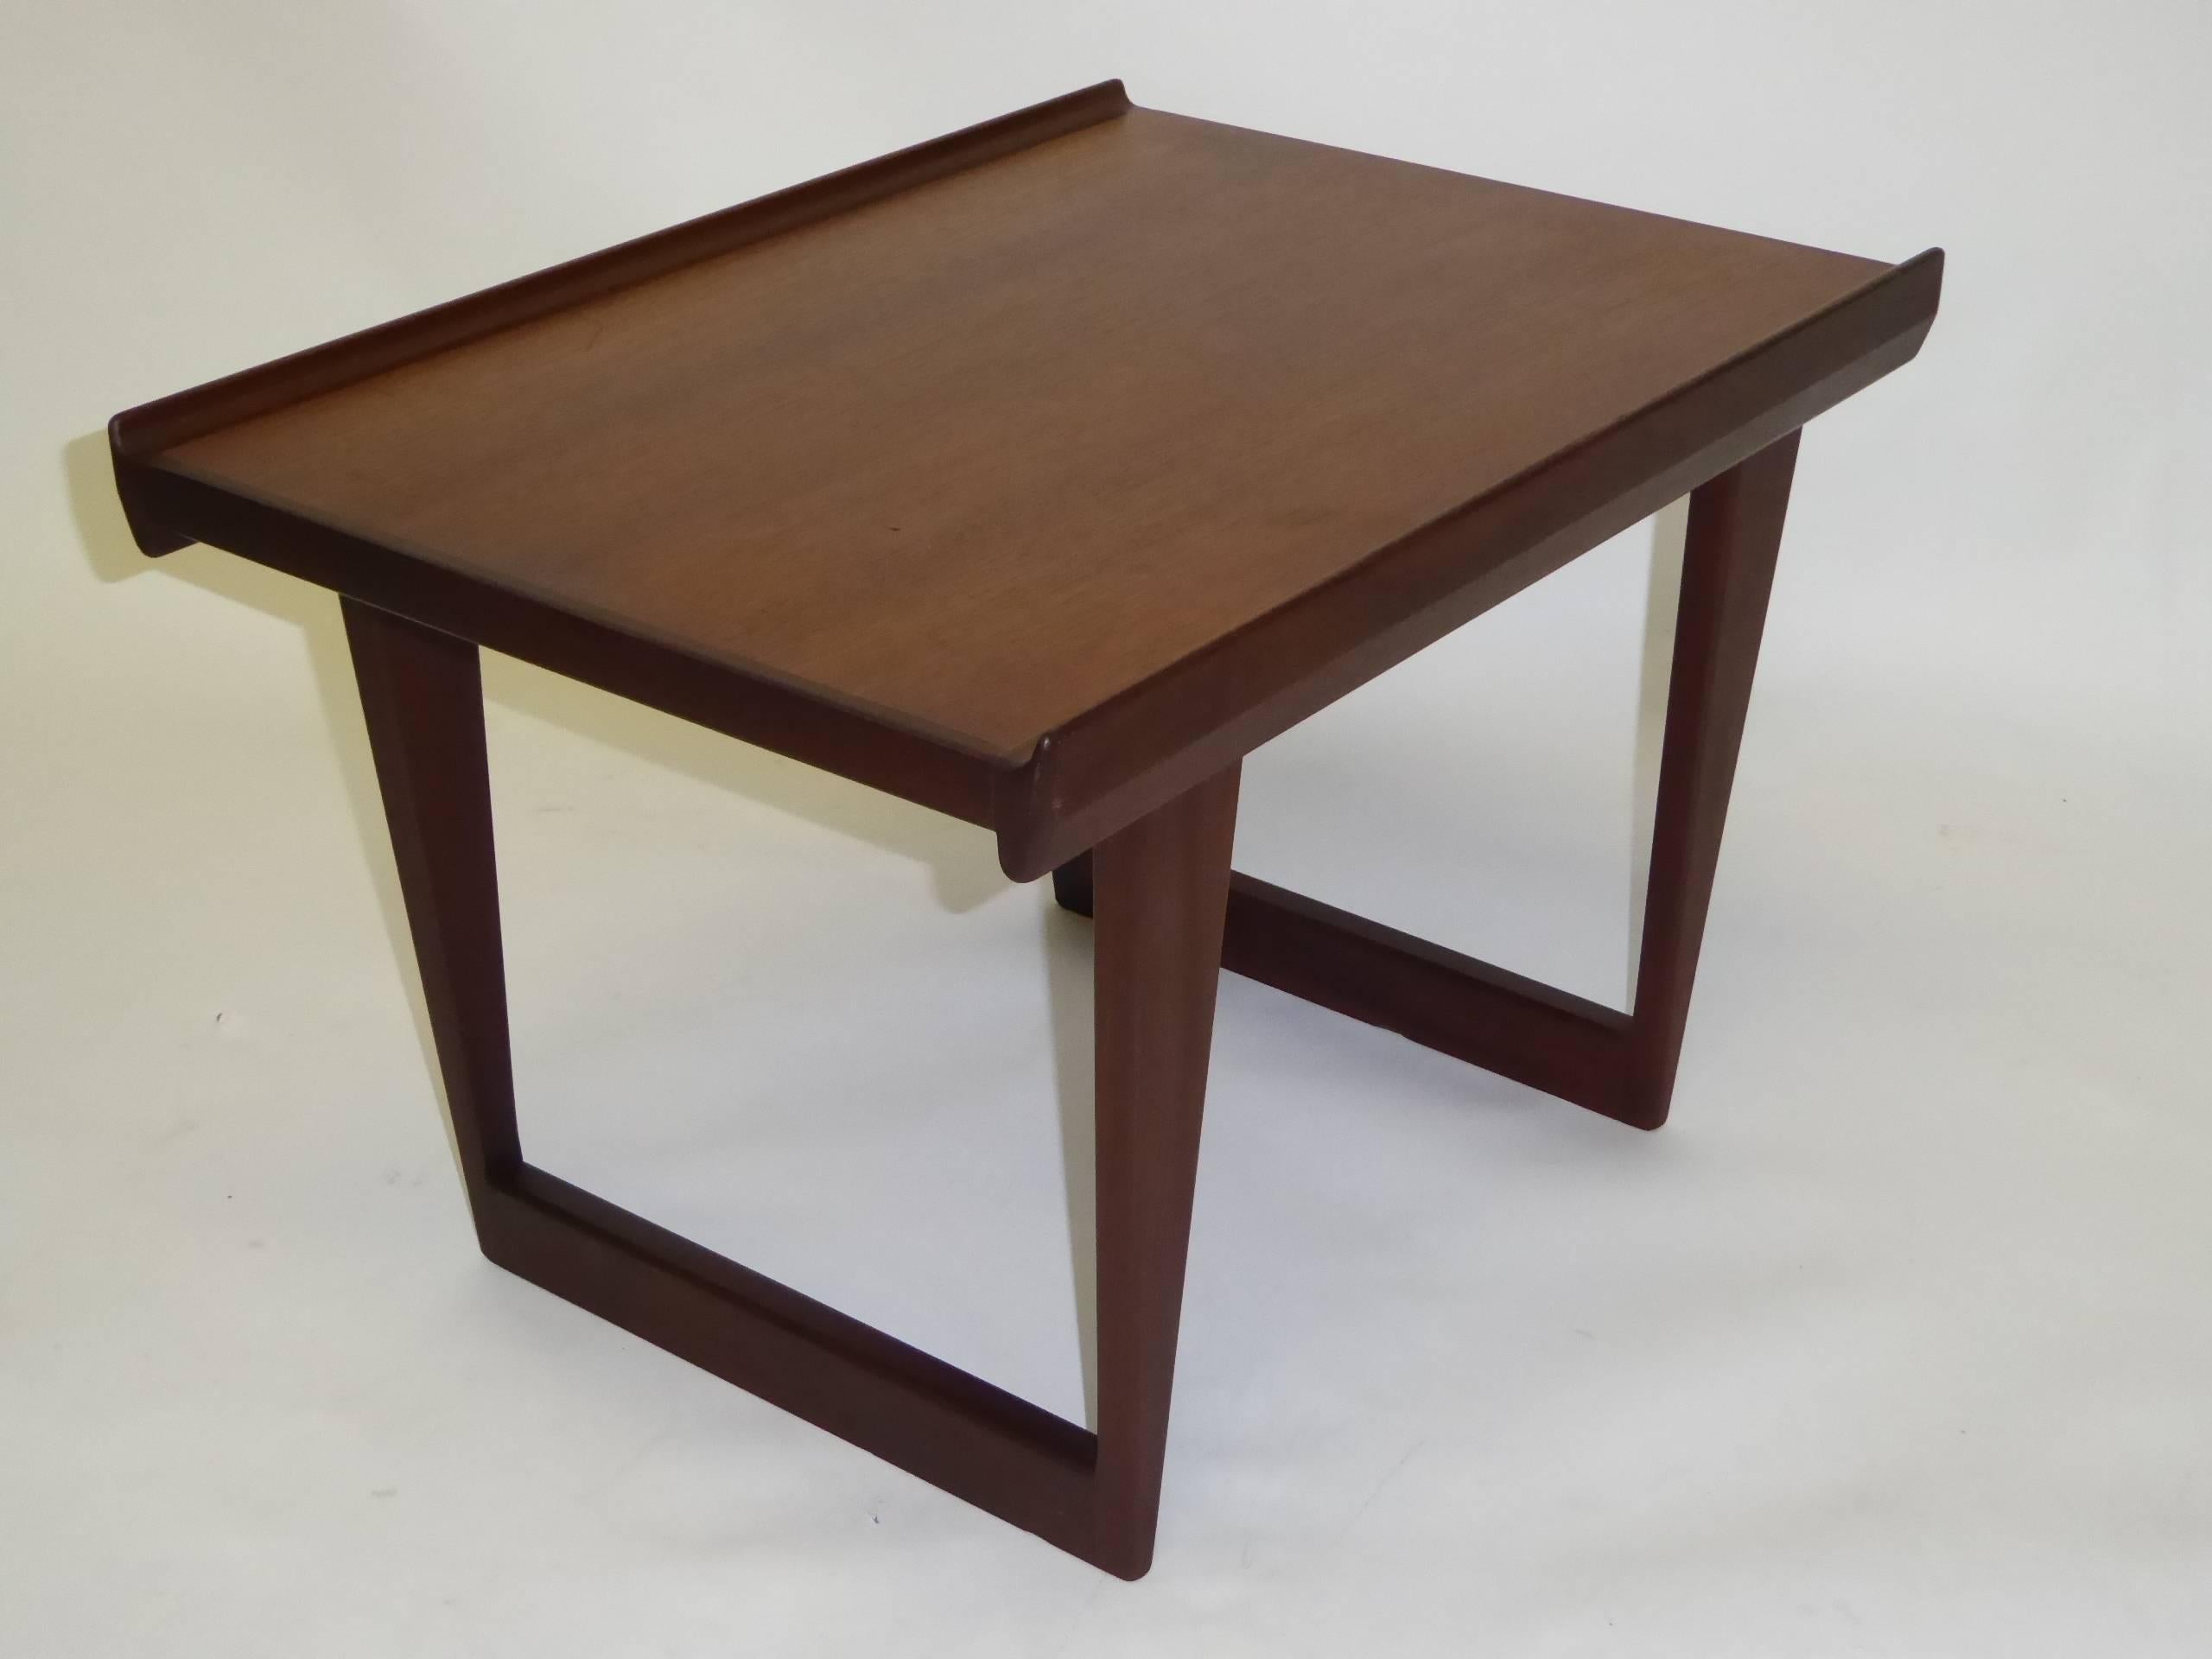 This teak side table or coffee table was designed by Peter Løvig Nielsen and manufactured by Løvig in the 1960s in Denmark. It is made with two tones of teak. Branded on the underside Lovig Dansk Design and stamped twice 1963. This piece is in a